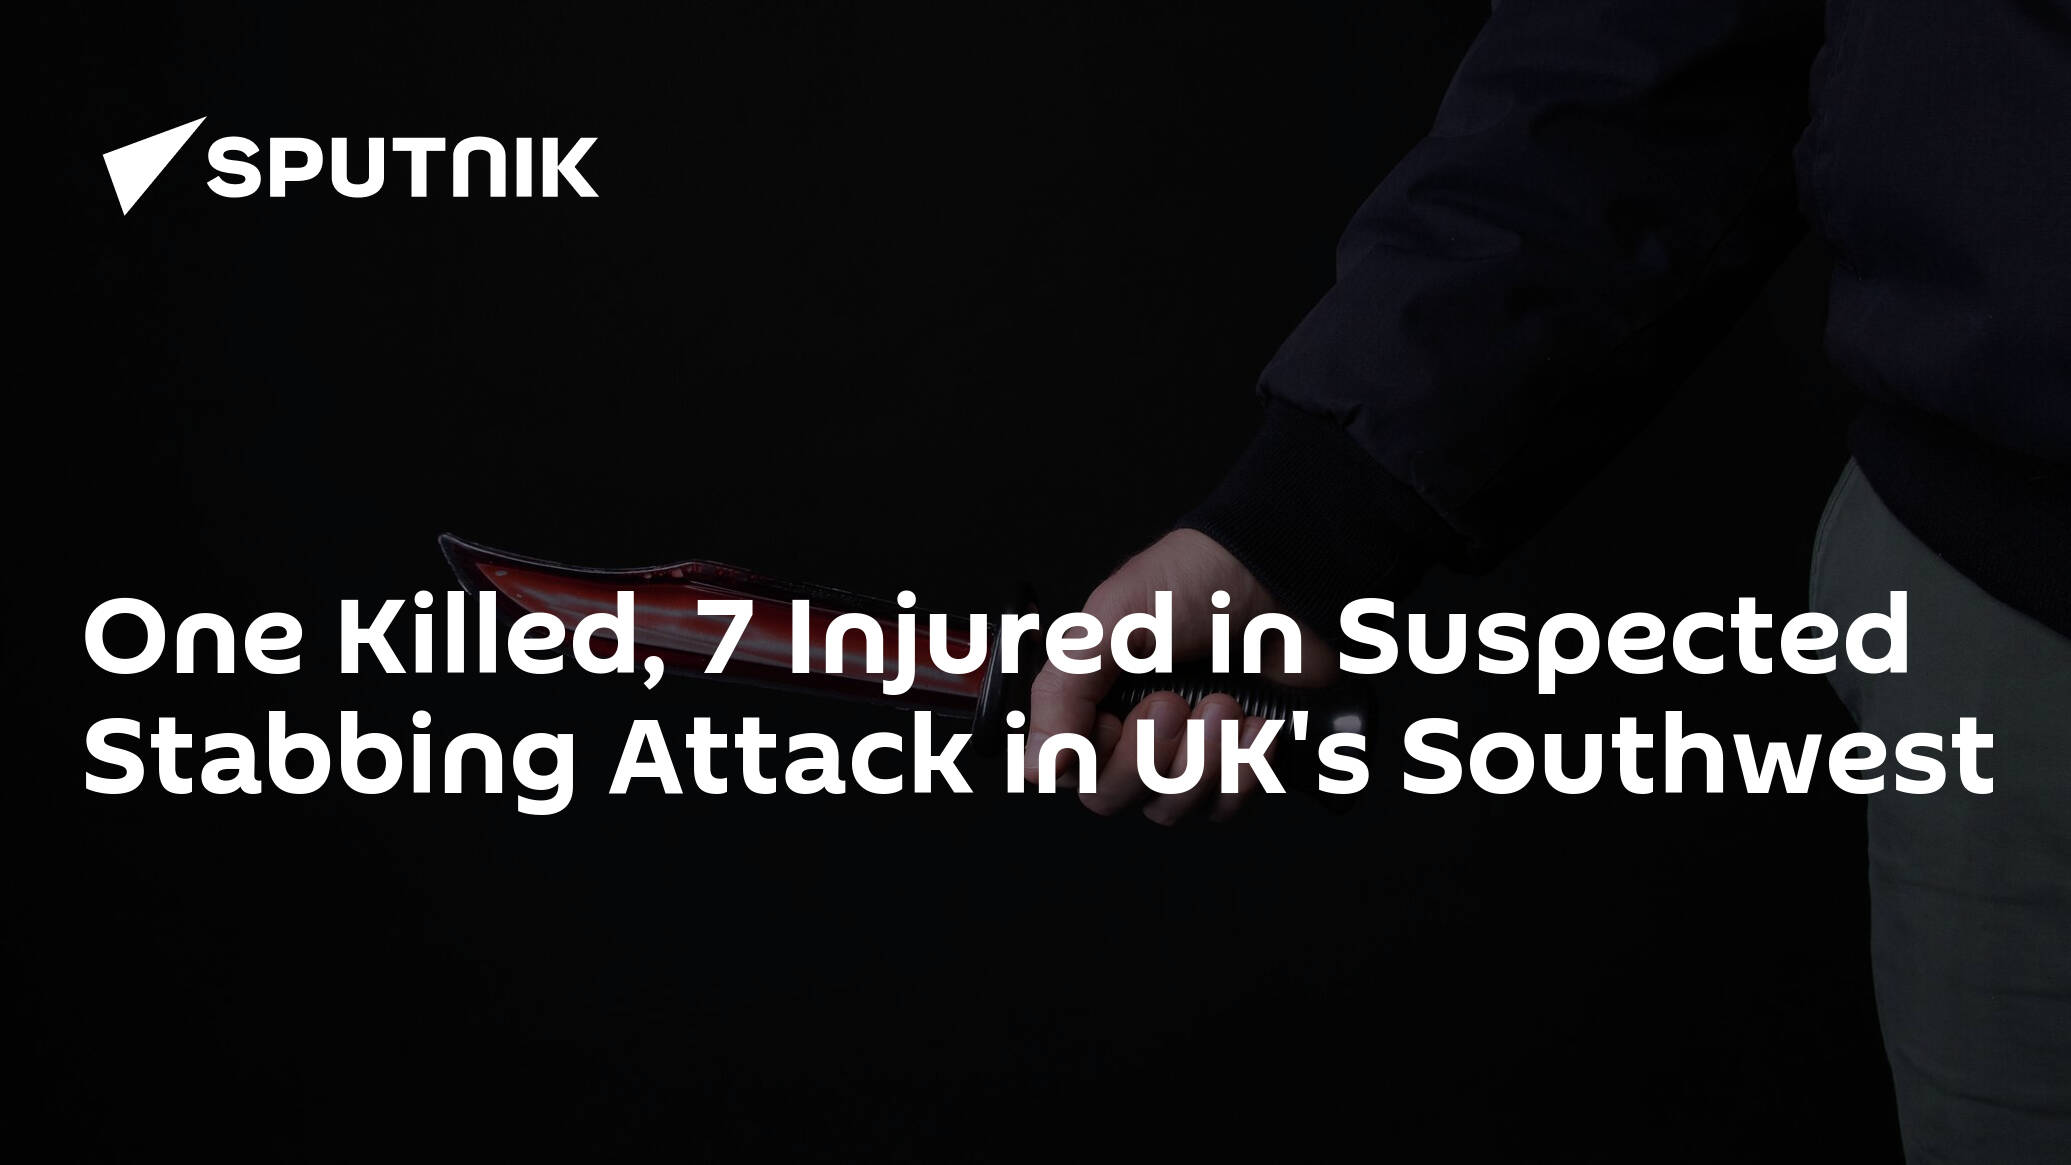 One Killed, 7 Injured in Suspected Stabbing Attack in UK's Southwest